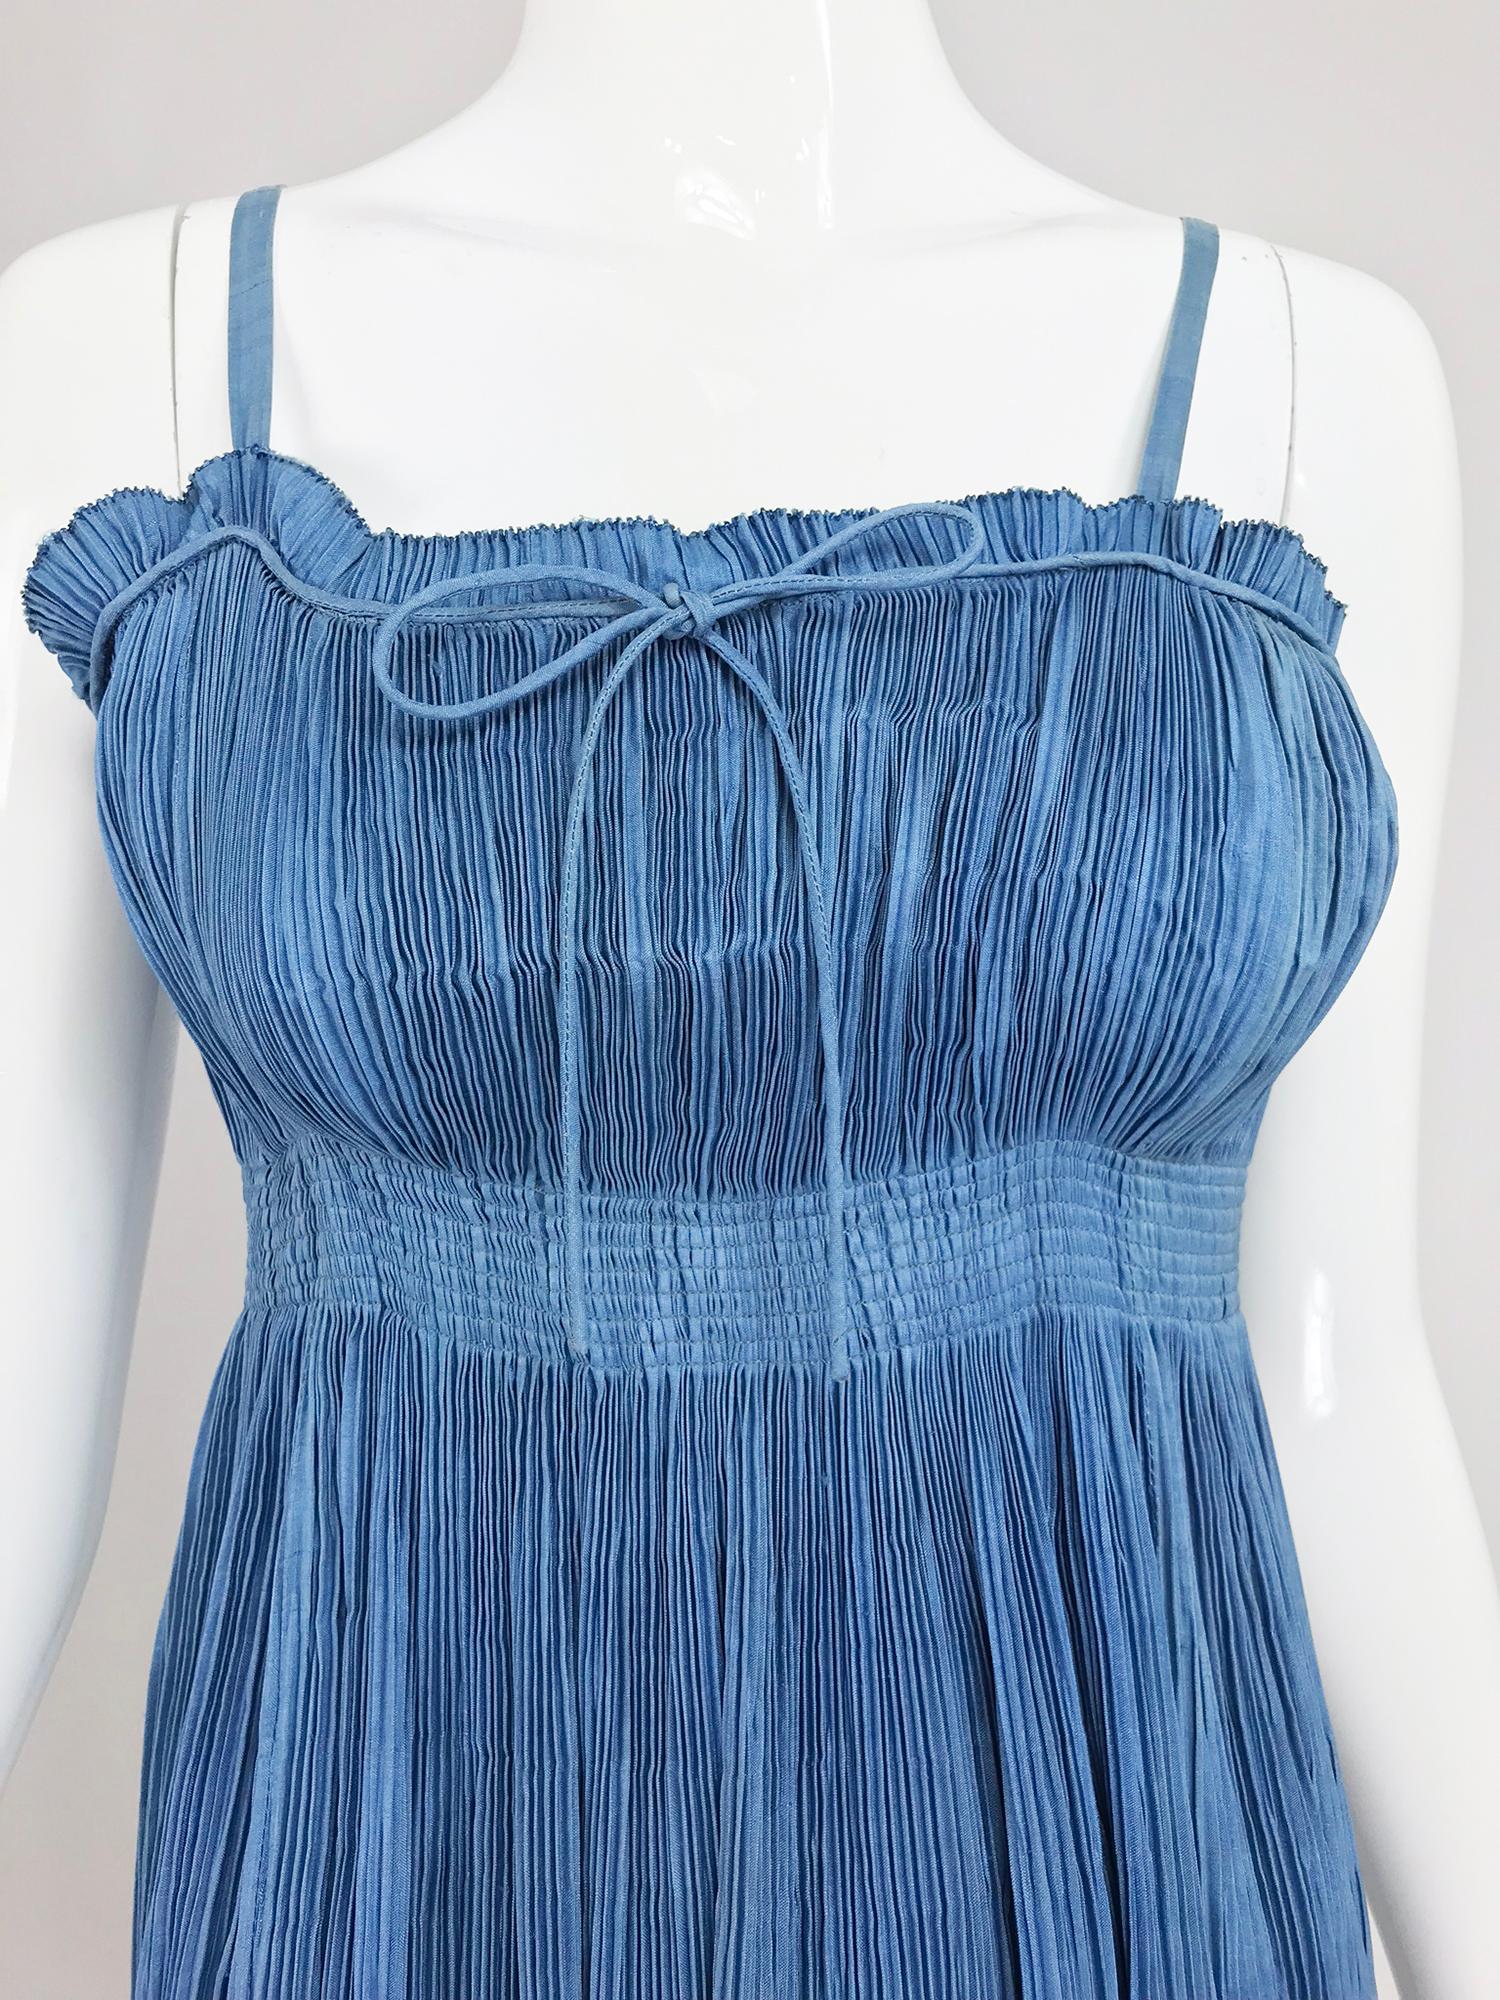 1930s Blue Pinch Pleated Raw Silk Couture Evening Gown. Completely hand made this unusual gown was certainly made for a special event! The blue has a lot of depth, light and luster, the use of the raw silk, pleated as it is, is quite unique. I would